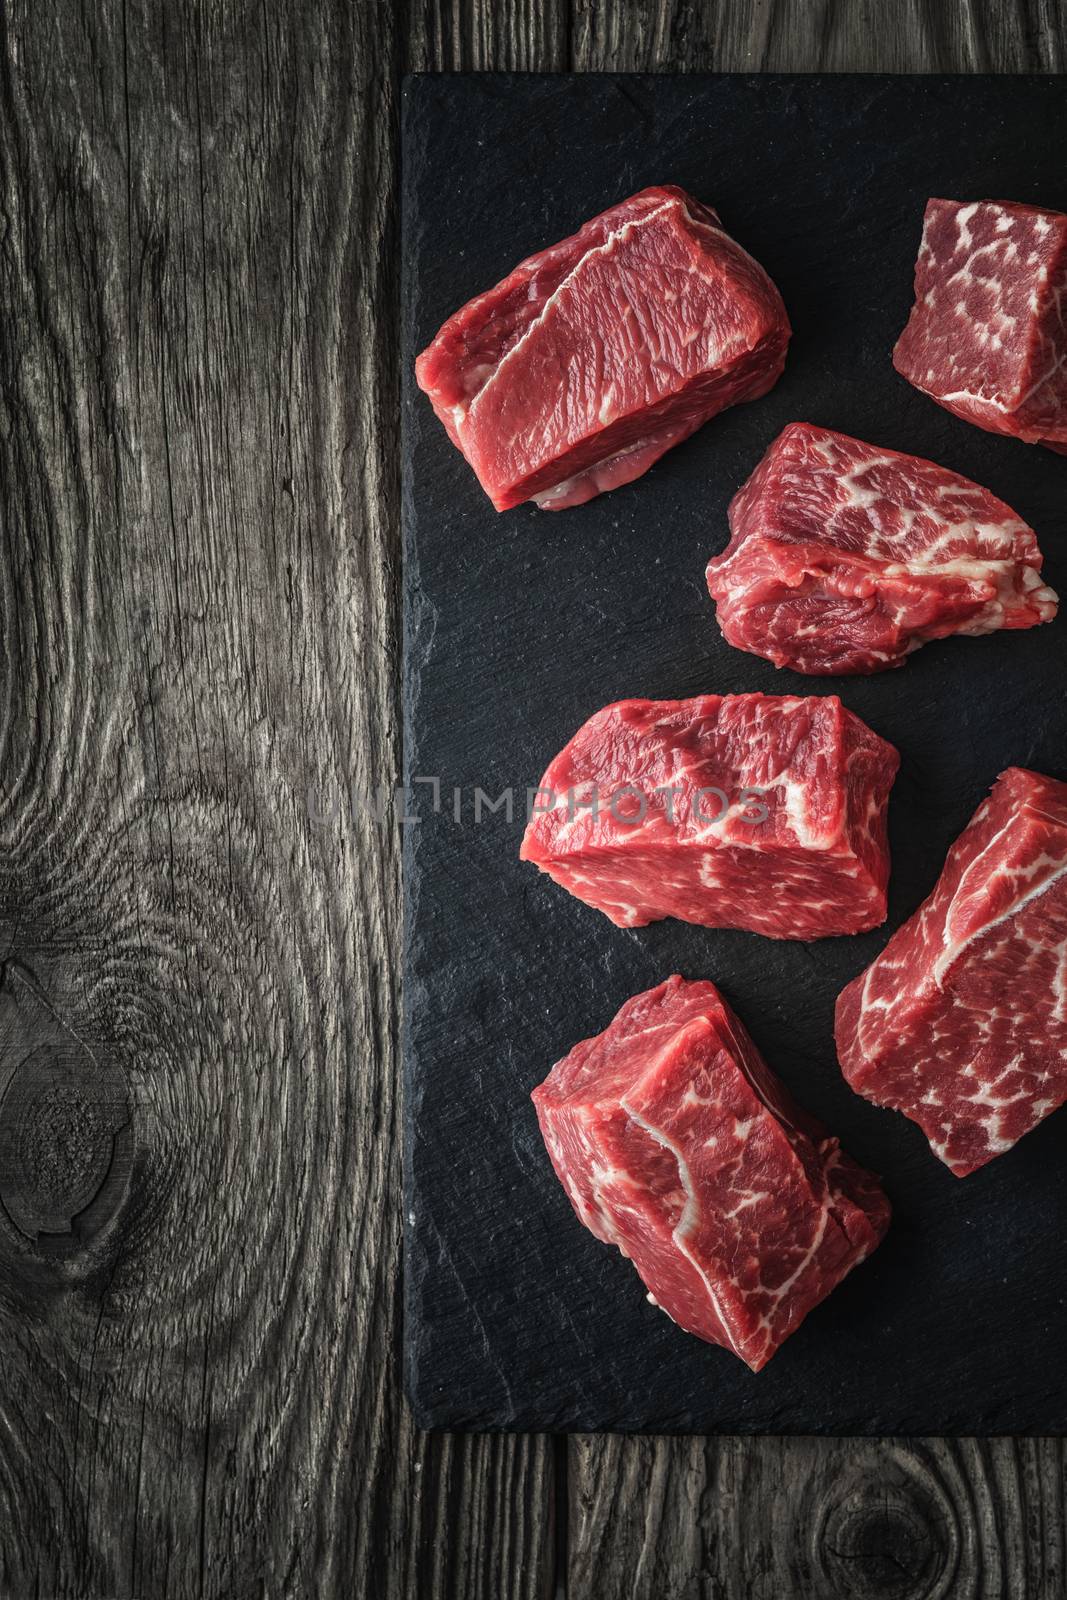 Raw angus beef slices on the black stone  on the wooden table vertical by Deniskarpenkov